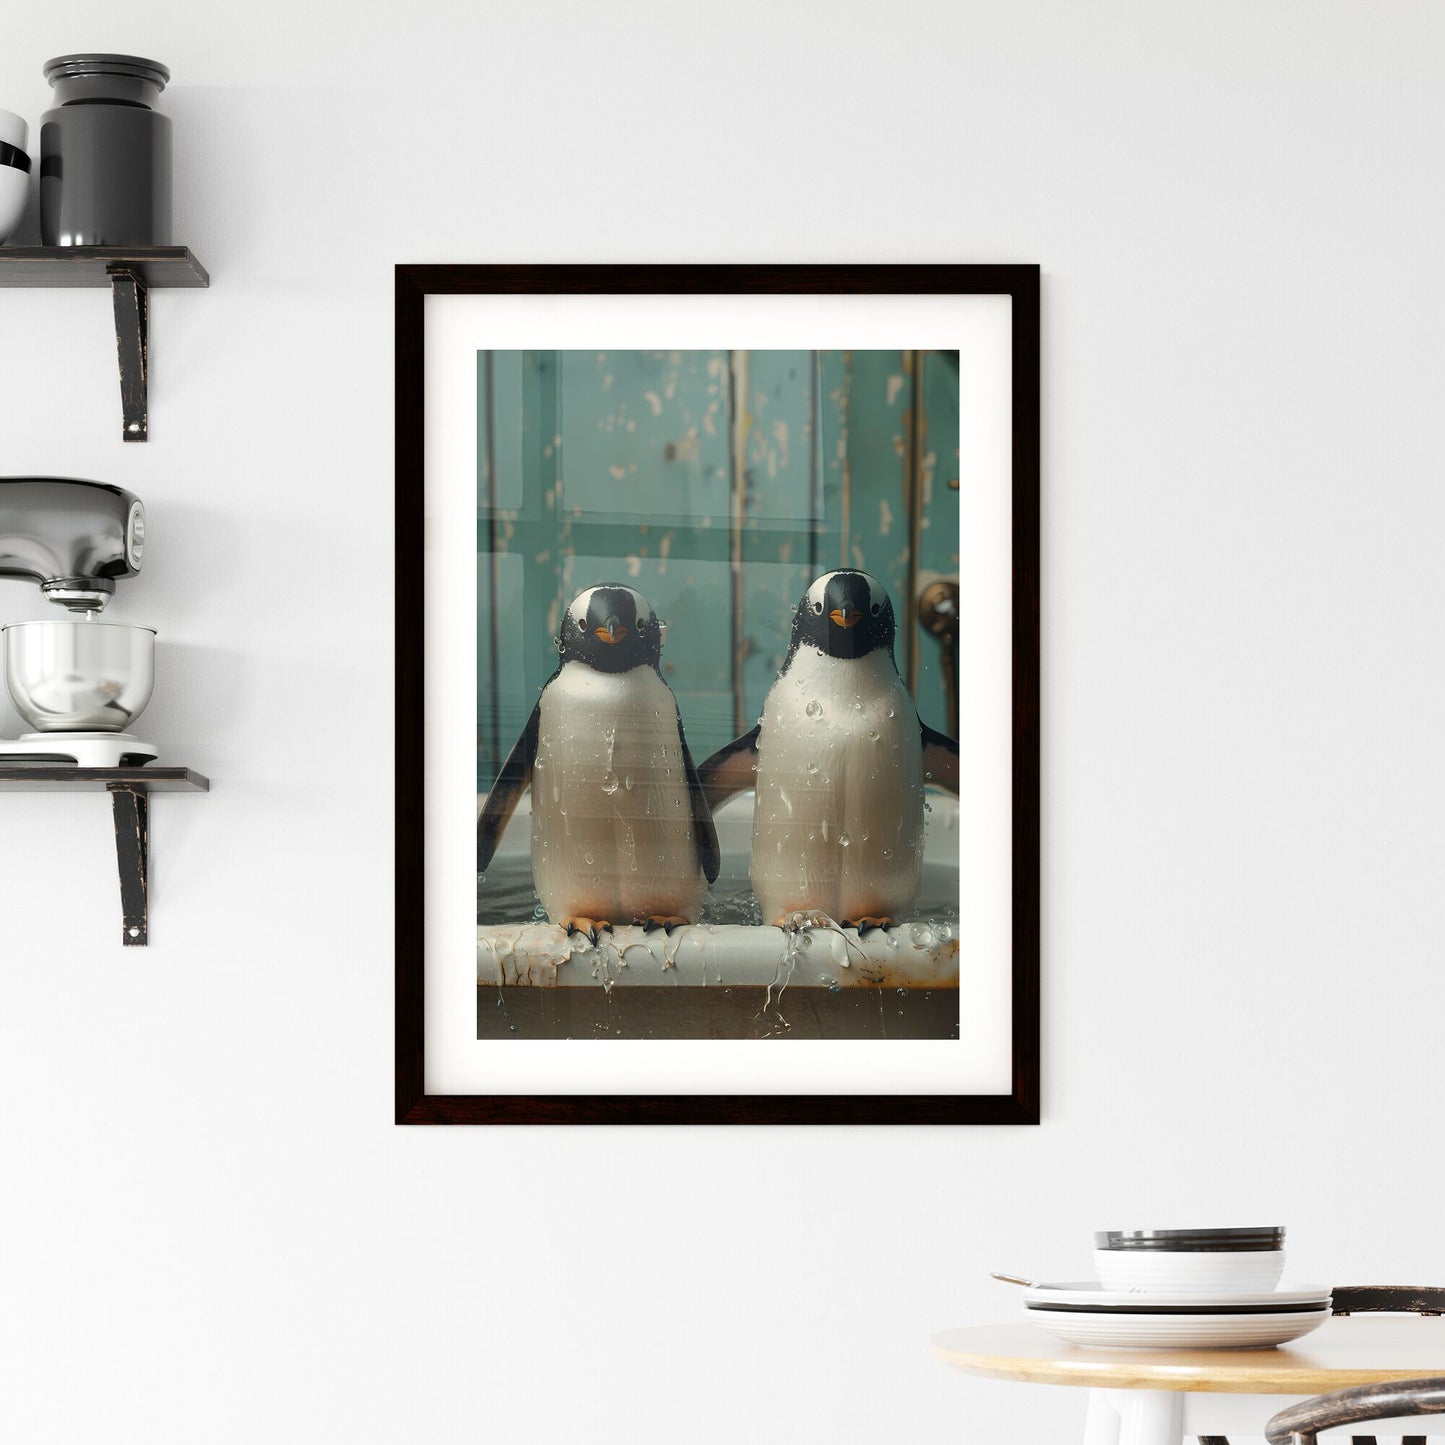 Wo penguins jump in a bathtub playing with each other, a storybook illustration, featured on cg society, art photography, whimsical, behance hd, storybook illustration black and white vintage - two penguins standing in a bathtub Default Title